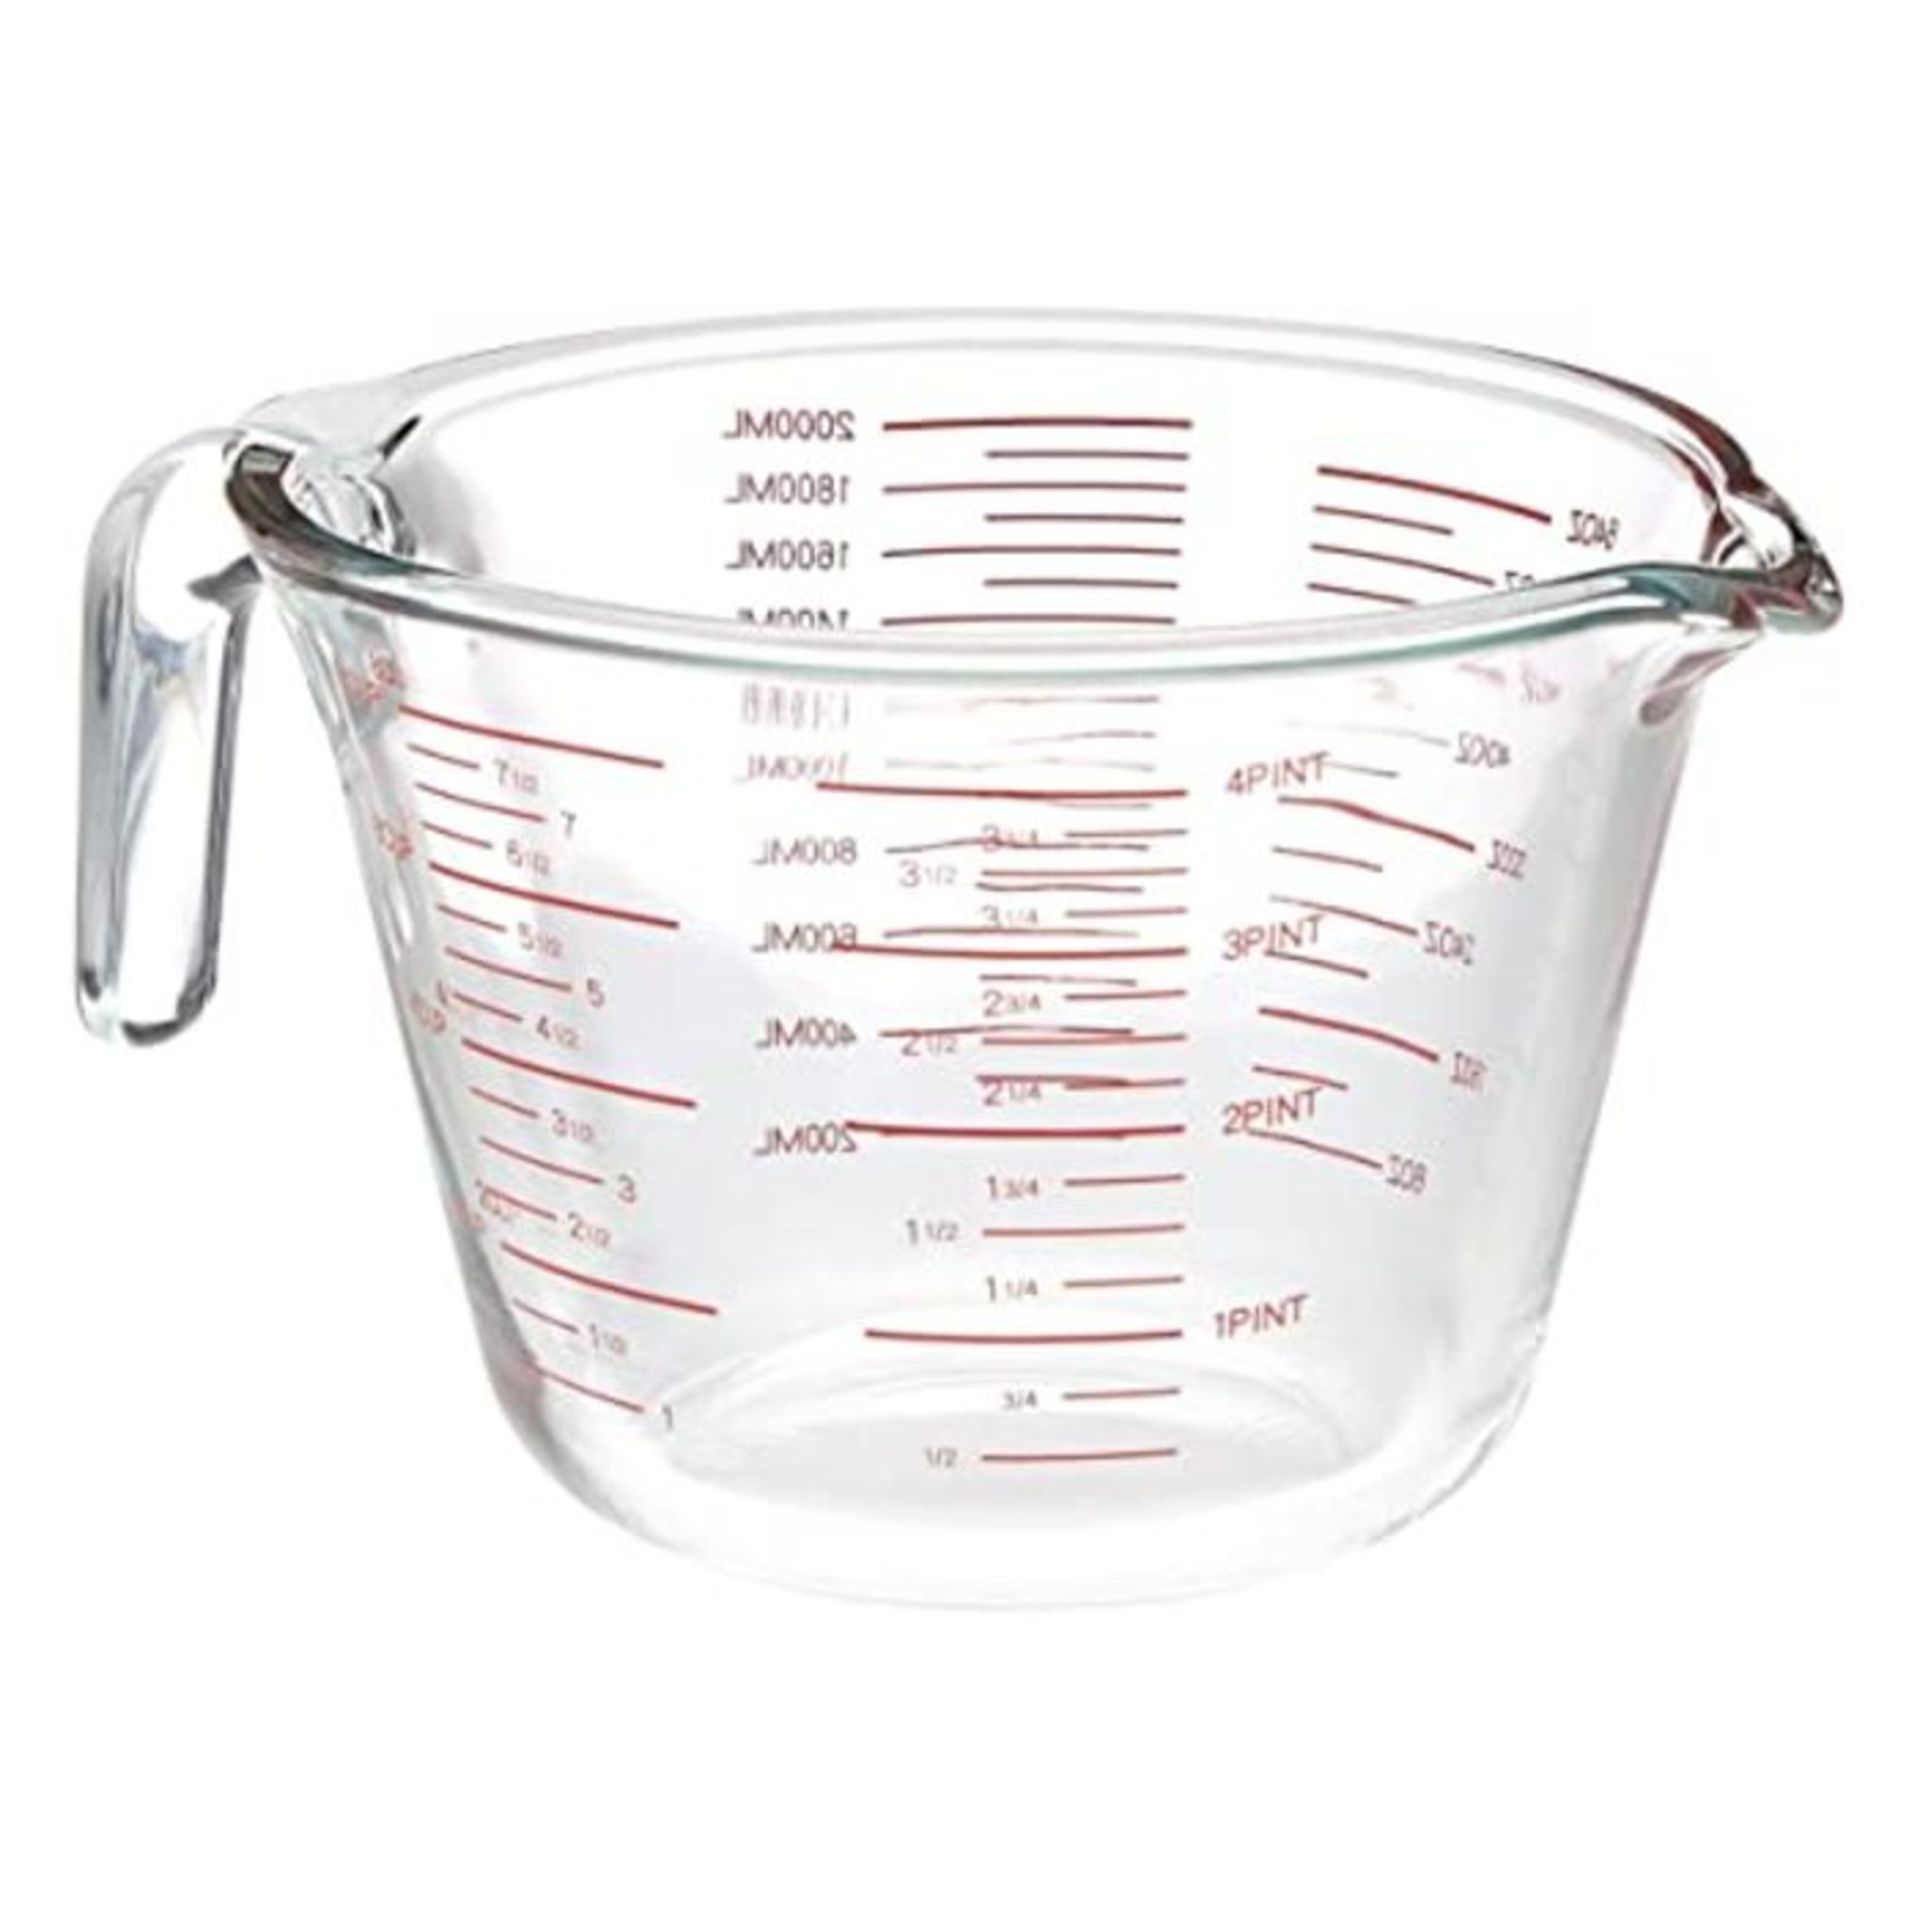 AmazonCommercial LMC200 Glass Measuring Cup, 8 Cup Capacity (2 Liters)